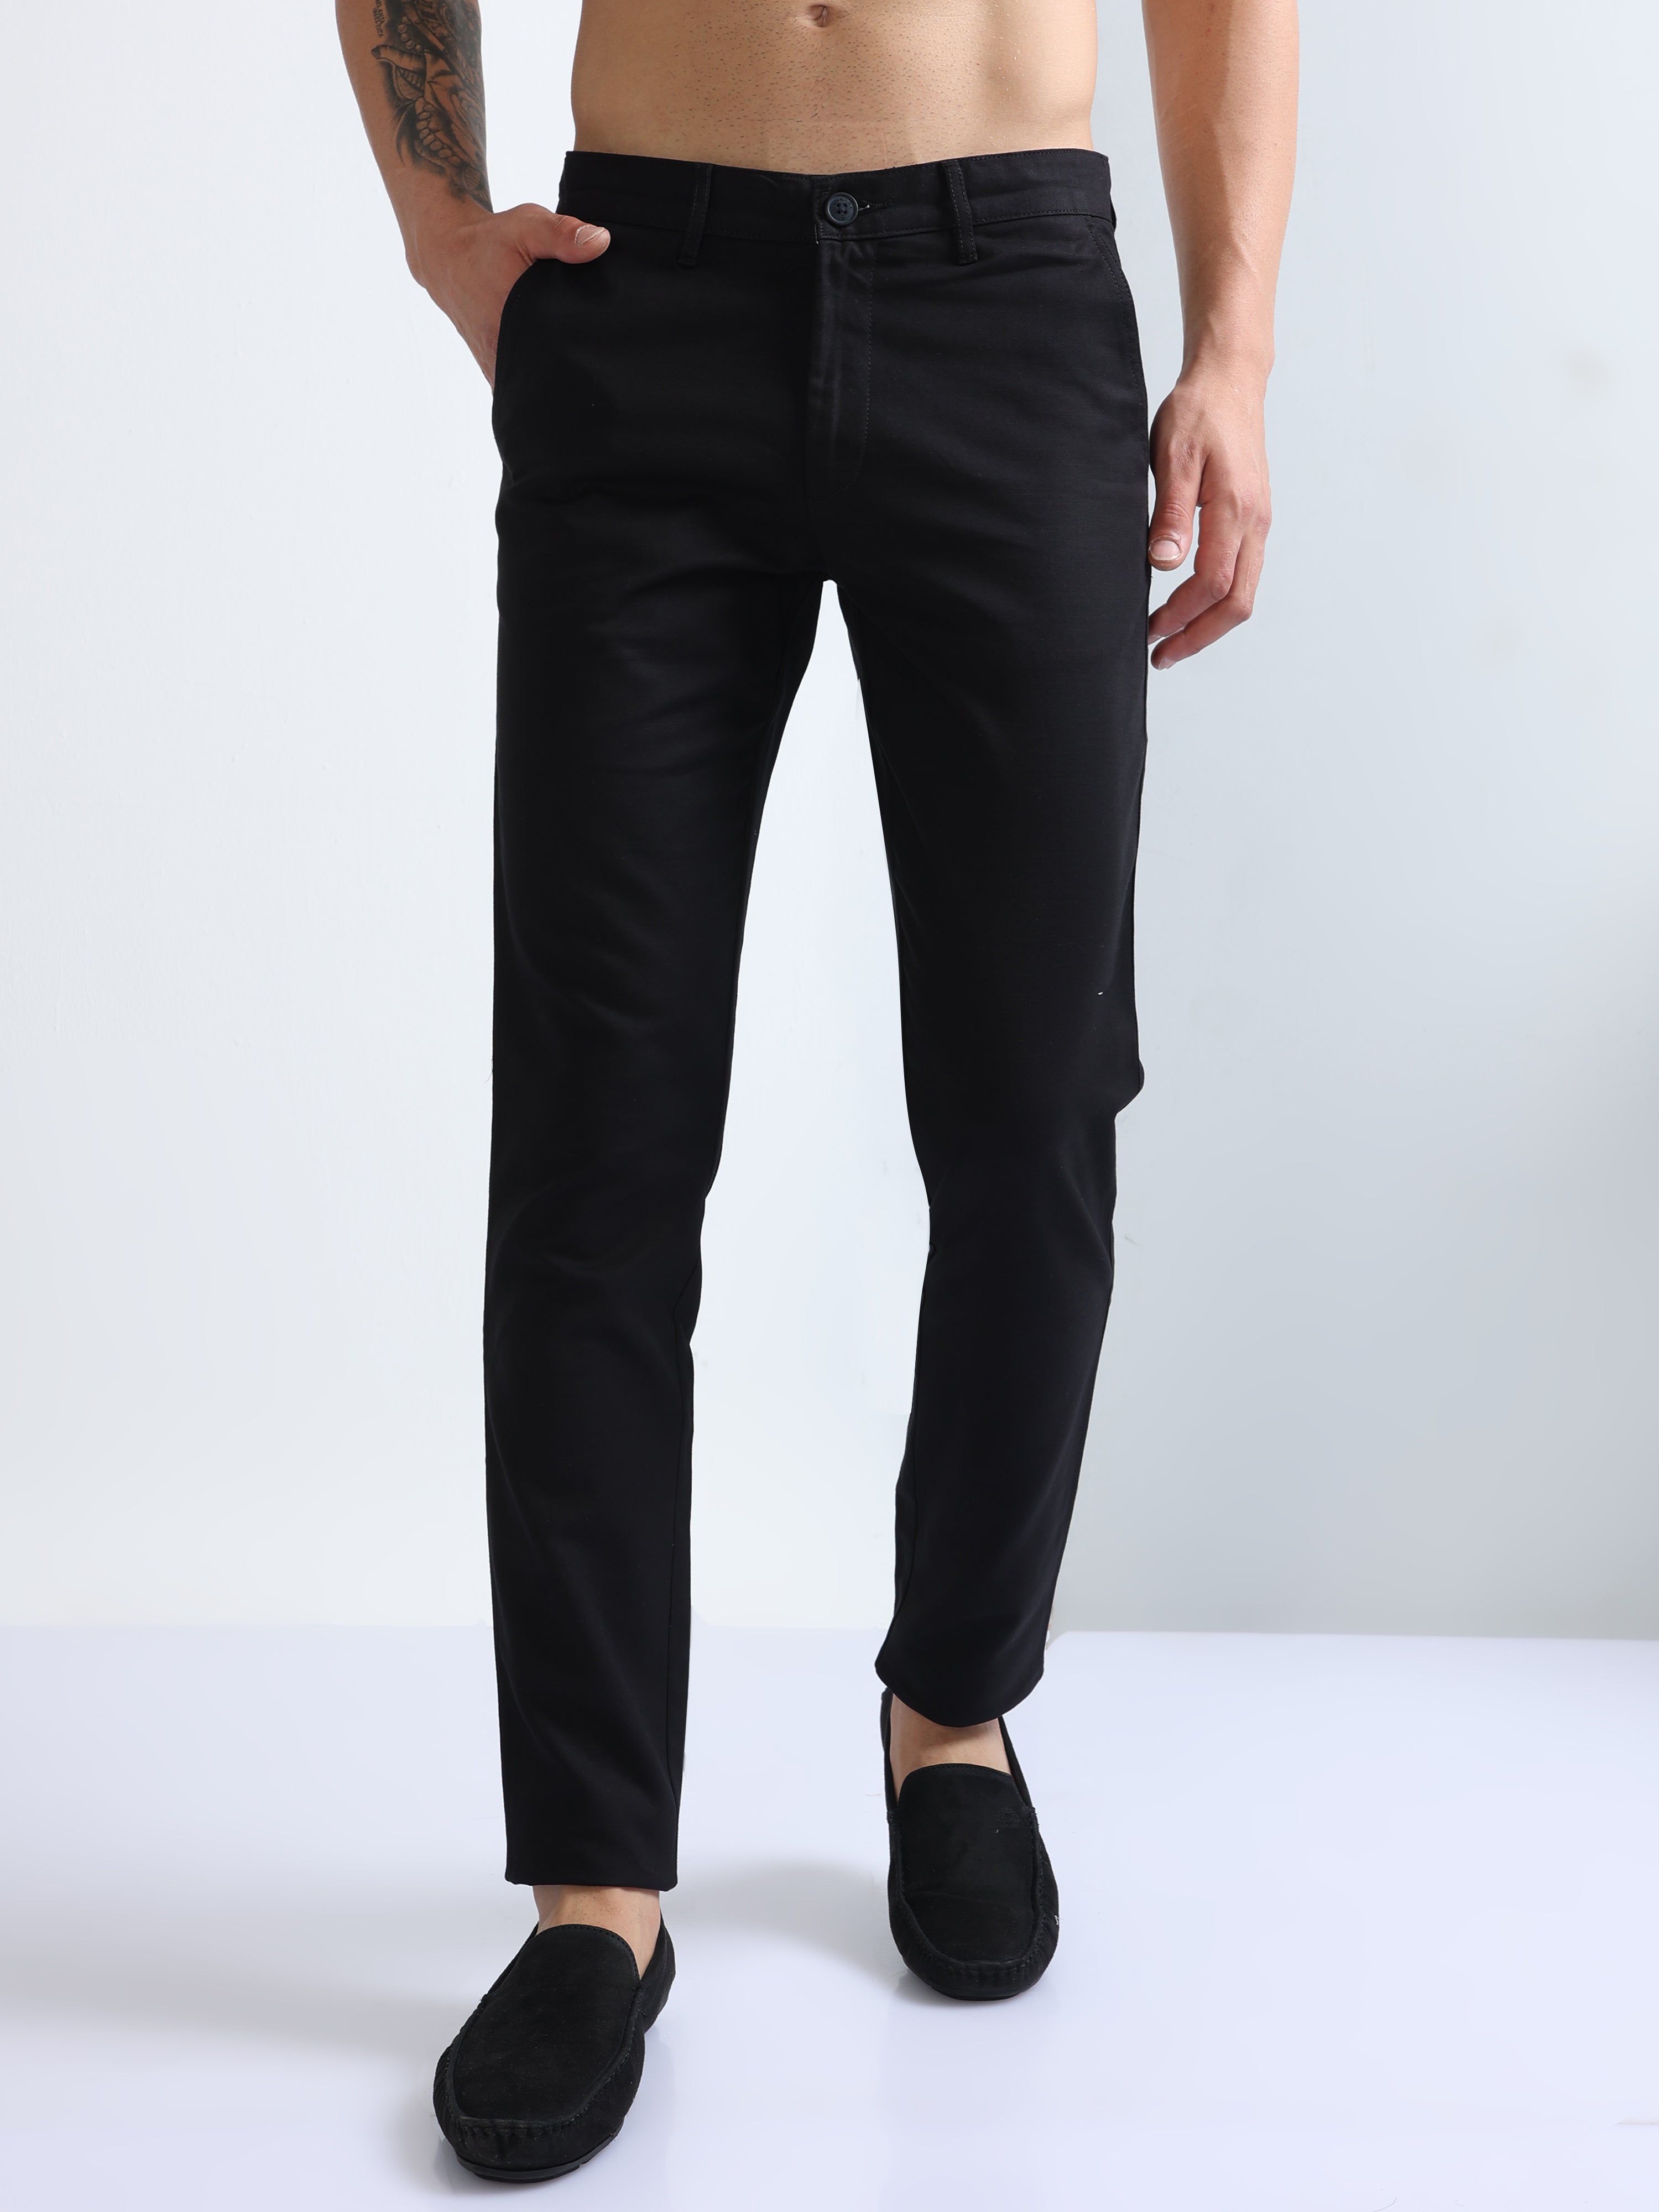 Straight Pants: Buy Cotton Pants Online At Soch